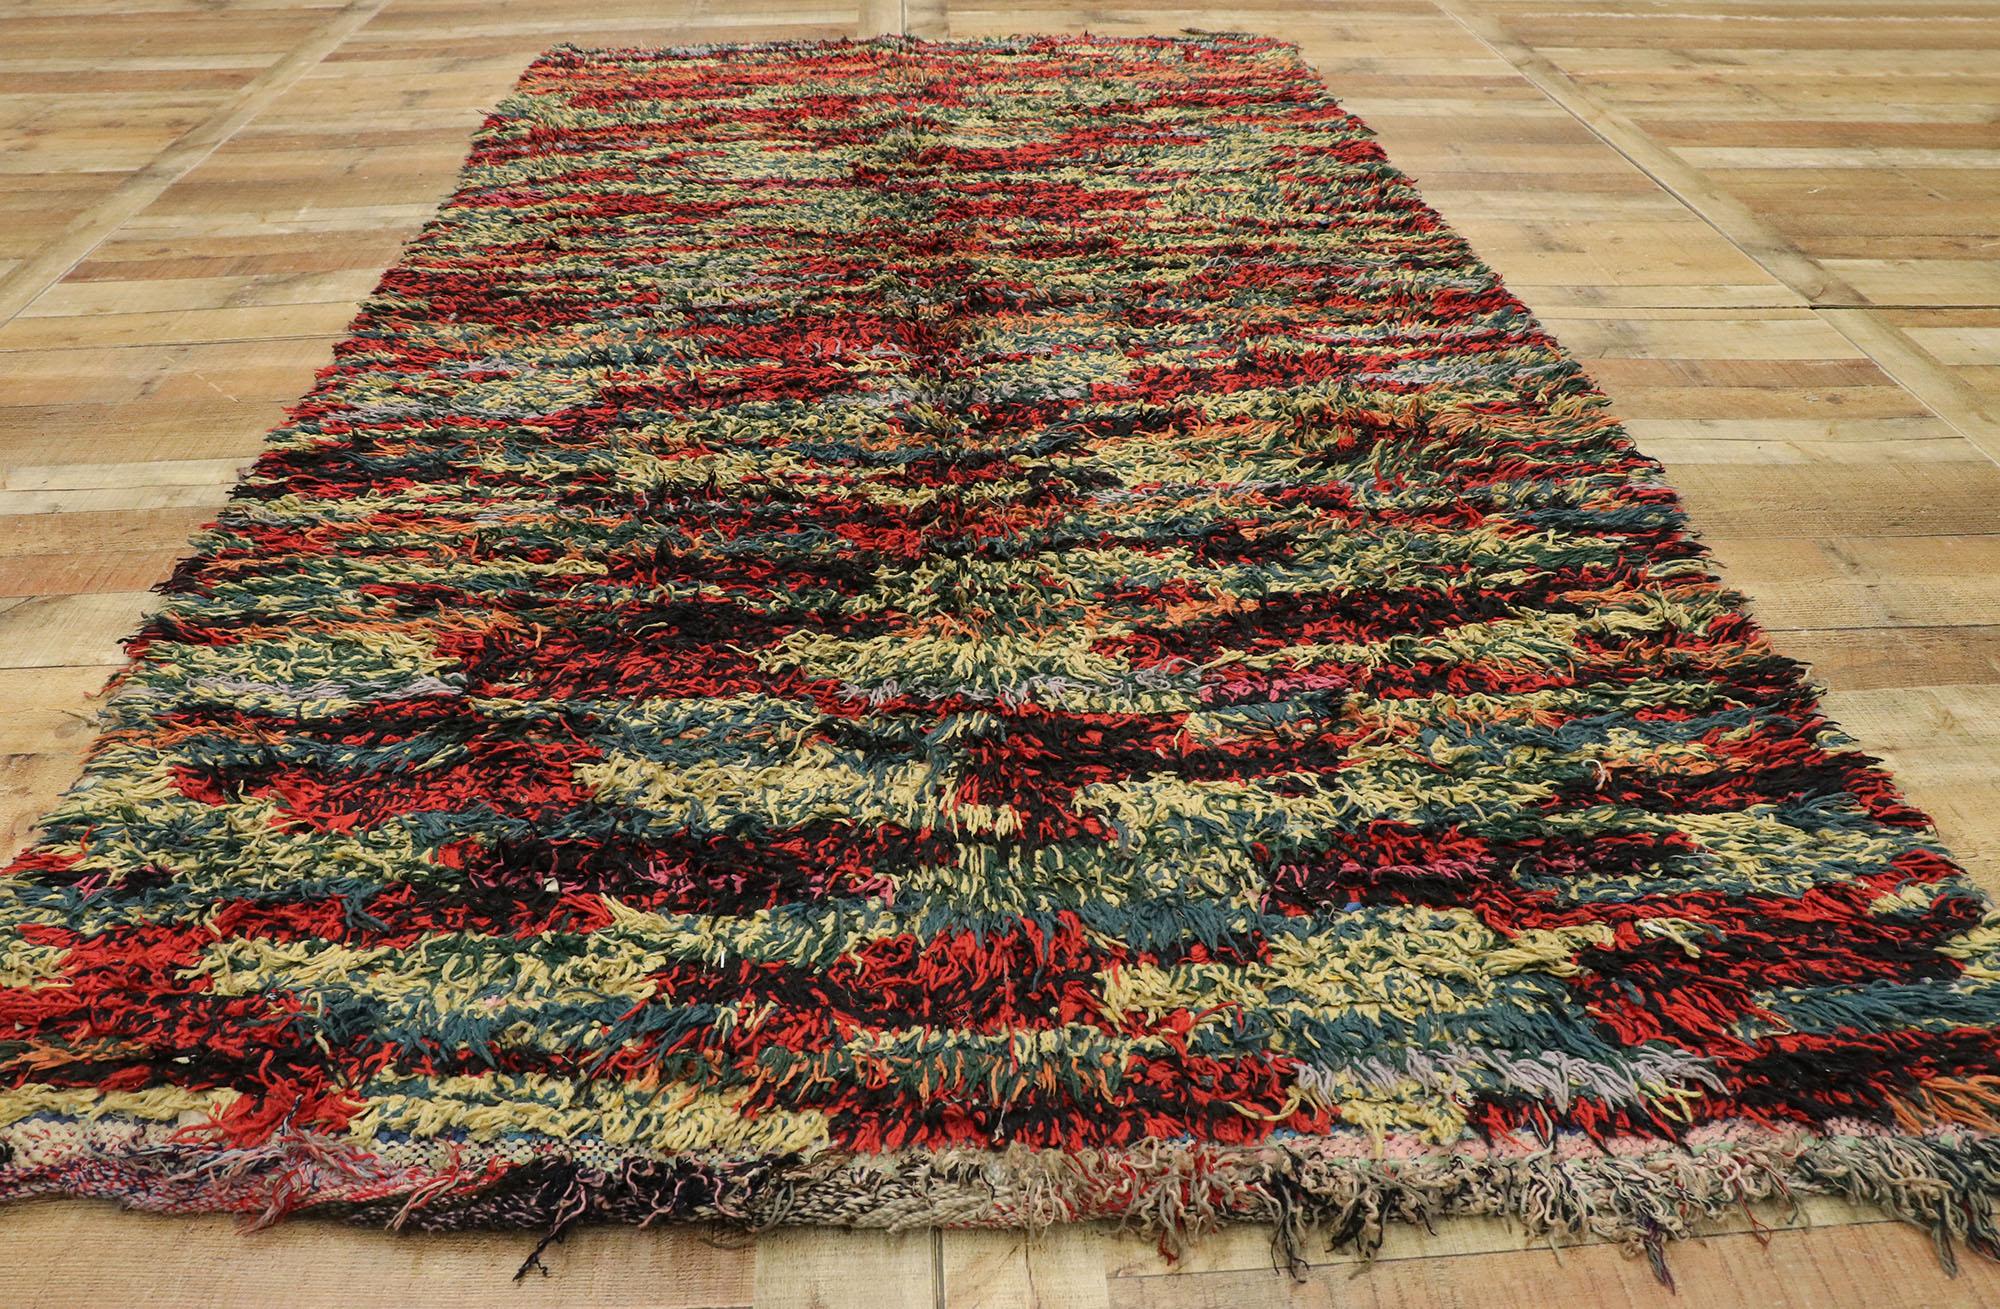 20573 Vintage Boucherouite Boujad Moroccan Rag Rug, 04'10 x 09'00. Immerse yourself in the dynamic vibrancy of Boujad Boucherouite rugs, emerging from the bustling city of Boujad in the Khouribga region. Crafted with meticulous skill by Berber